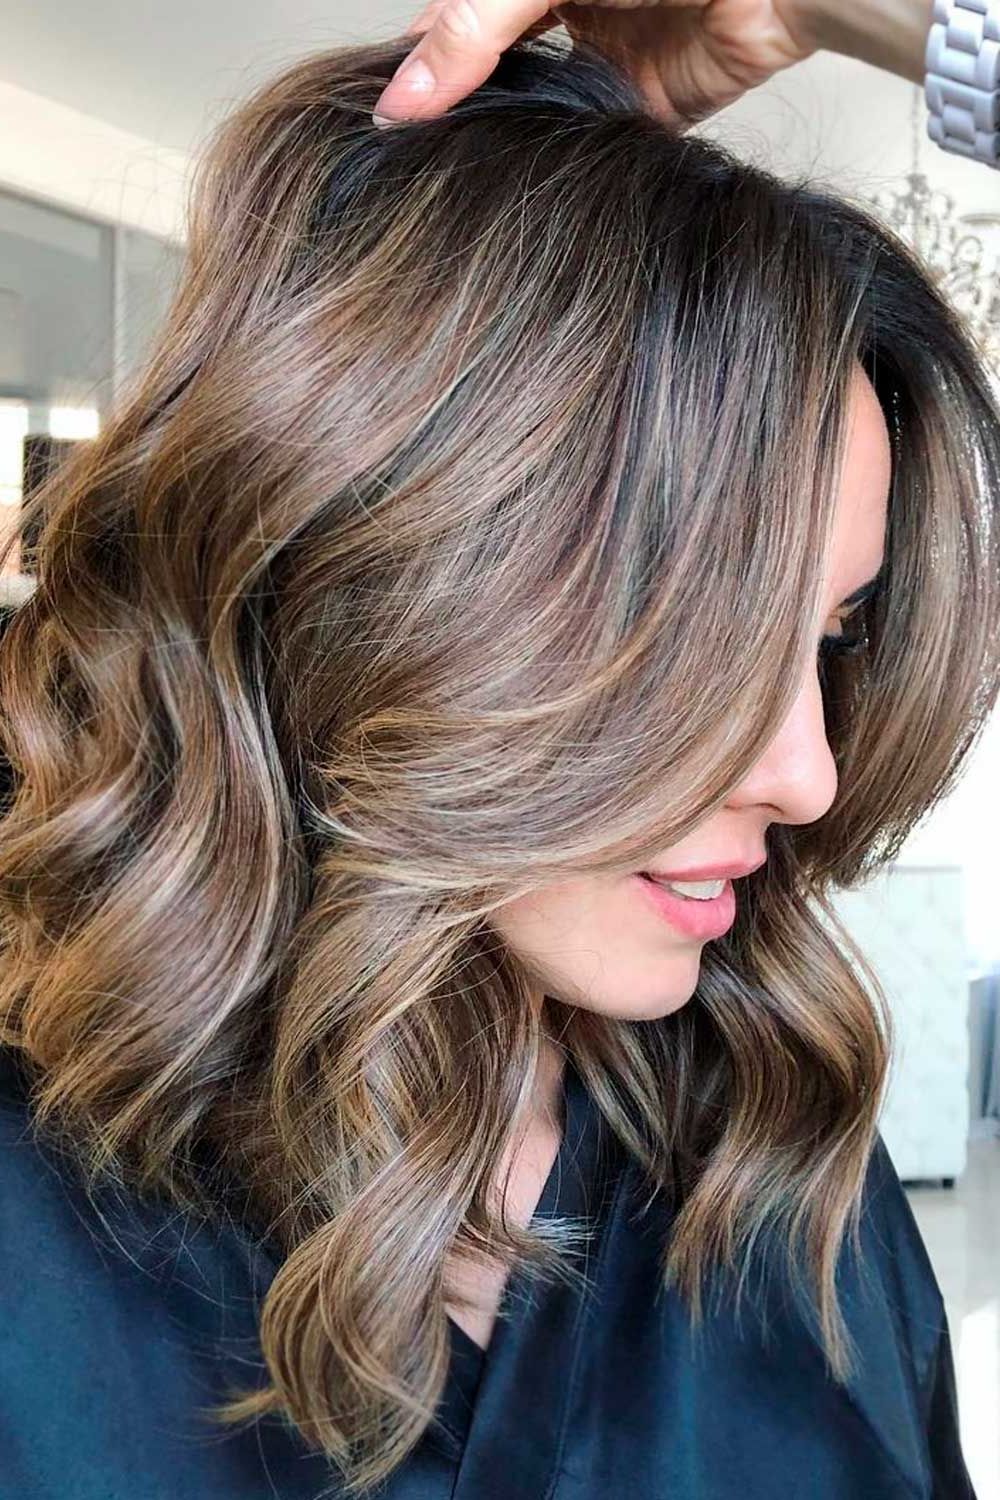 Untraditional Lob Haircut Ideas To Give A Try | Lovehairstyles Regarding Current Wavy Lob Haircuts With Caramel Highlights (View 19 of 25)